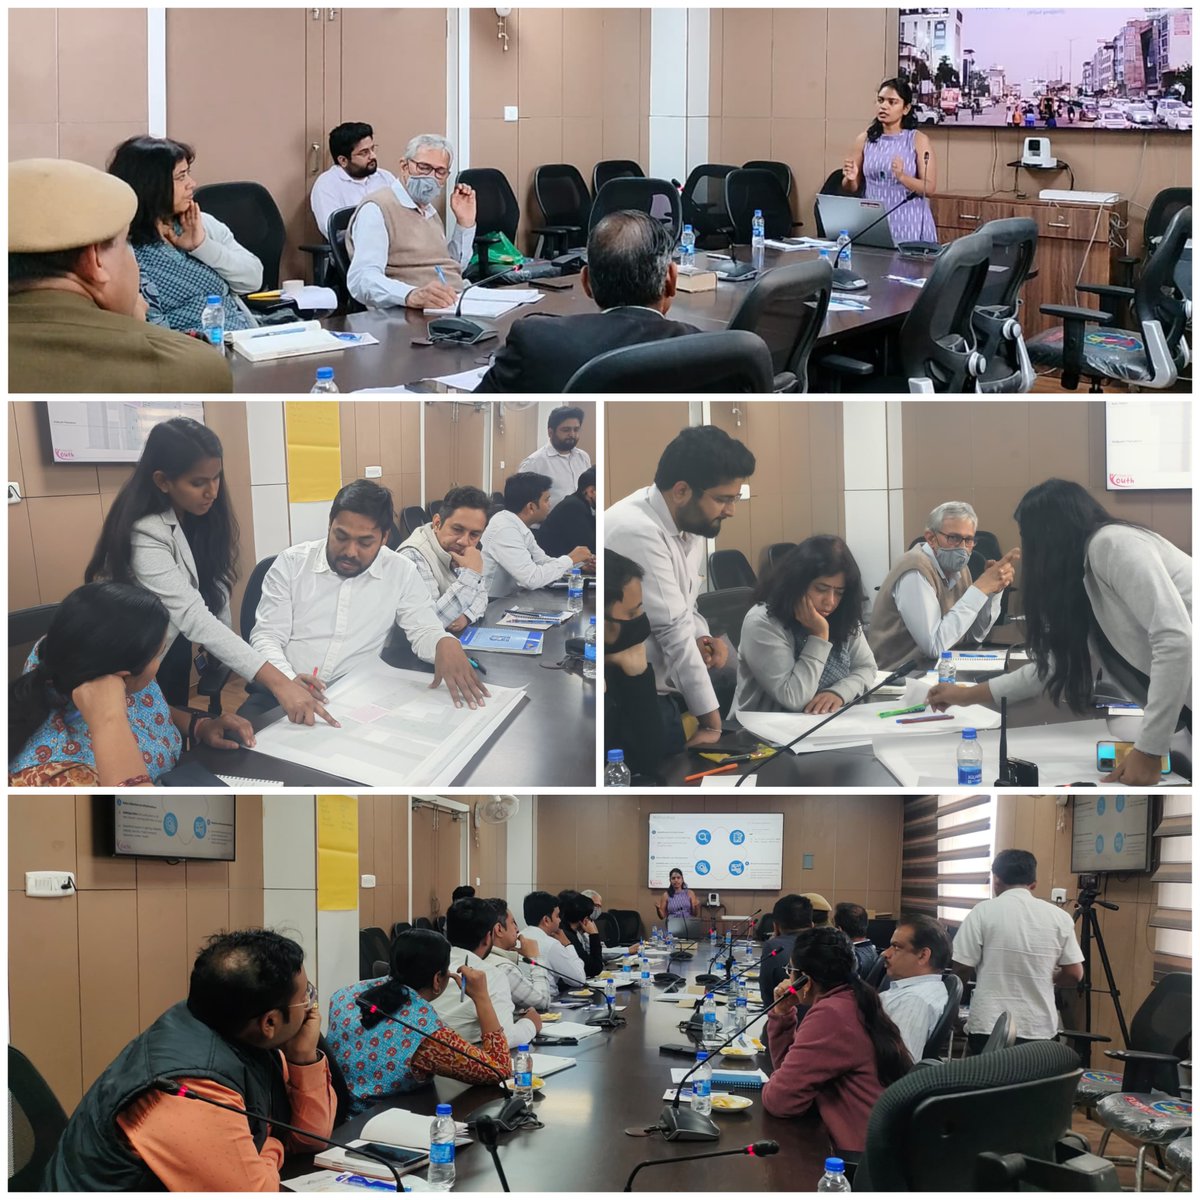 Exciting update! On Feb 22, @Safetipinapp & SPA Delhi teamed up with Jaipur's Road Safety Cell for a workshop on a Safe & Accessible Pilot Street Model. A step forward in creating safer, more inclusive urban spaces! #CitiesForYouth #JaipurSafety